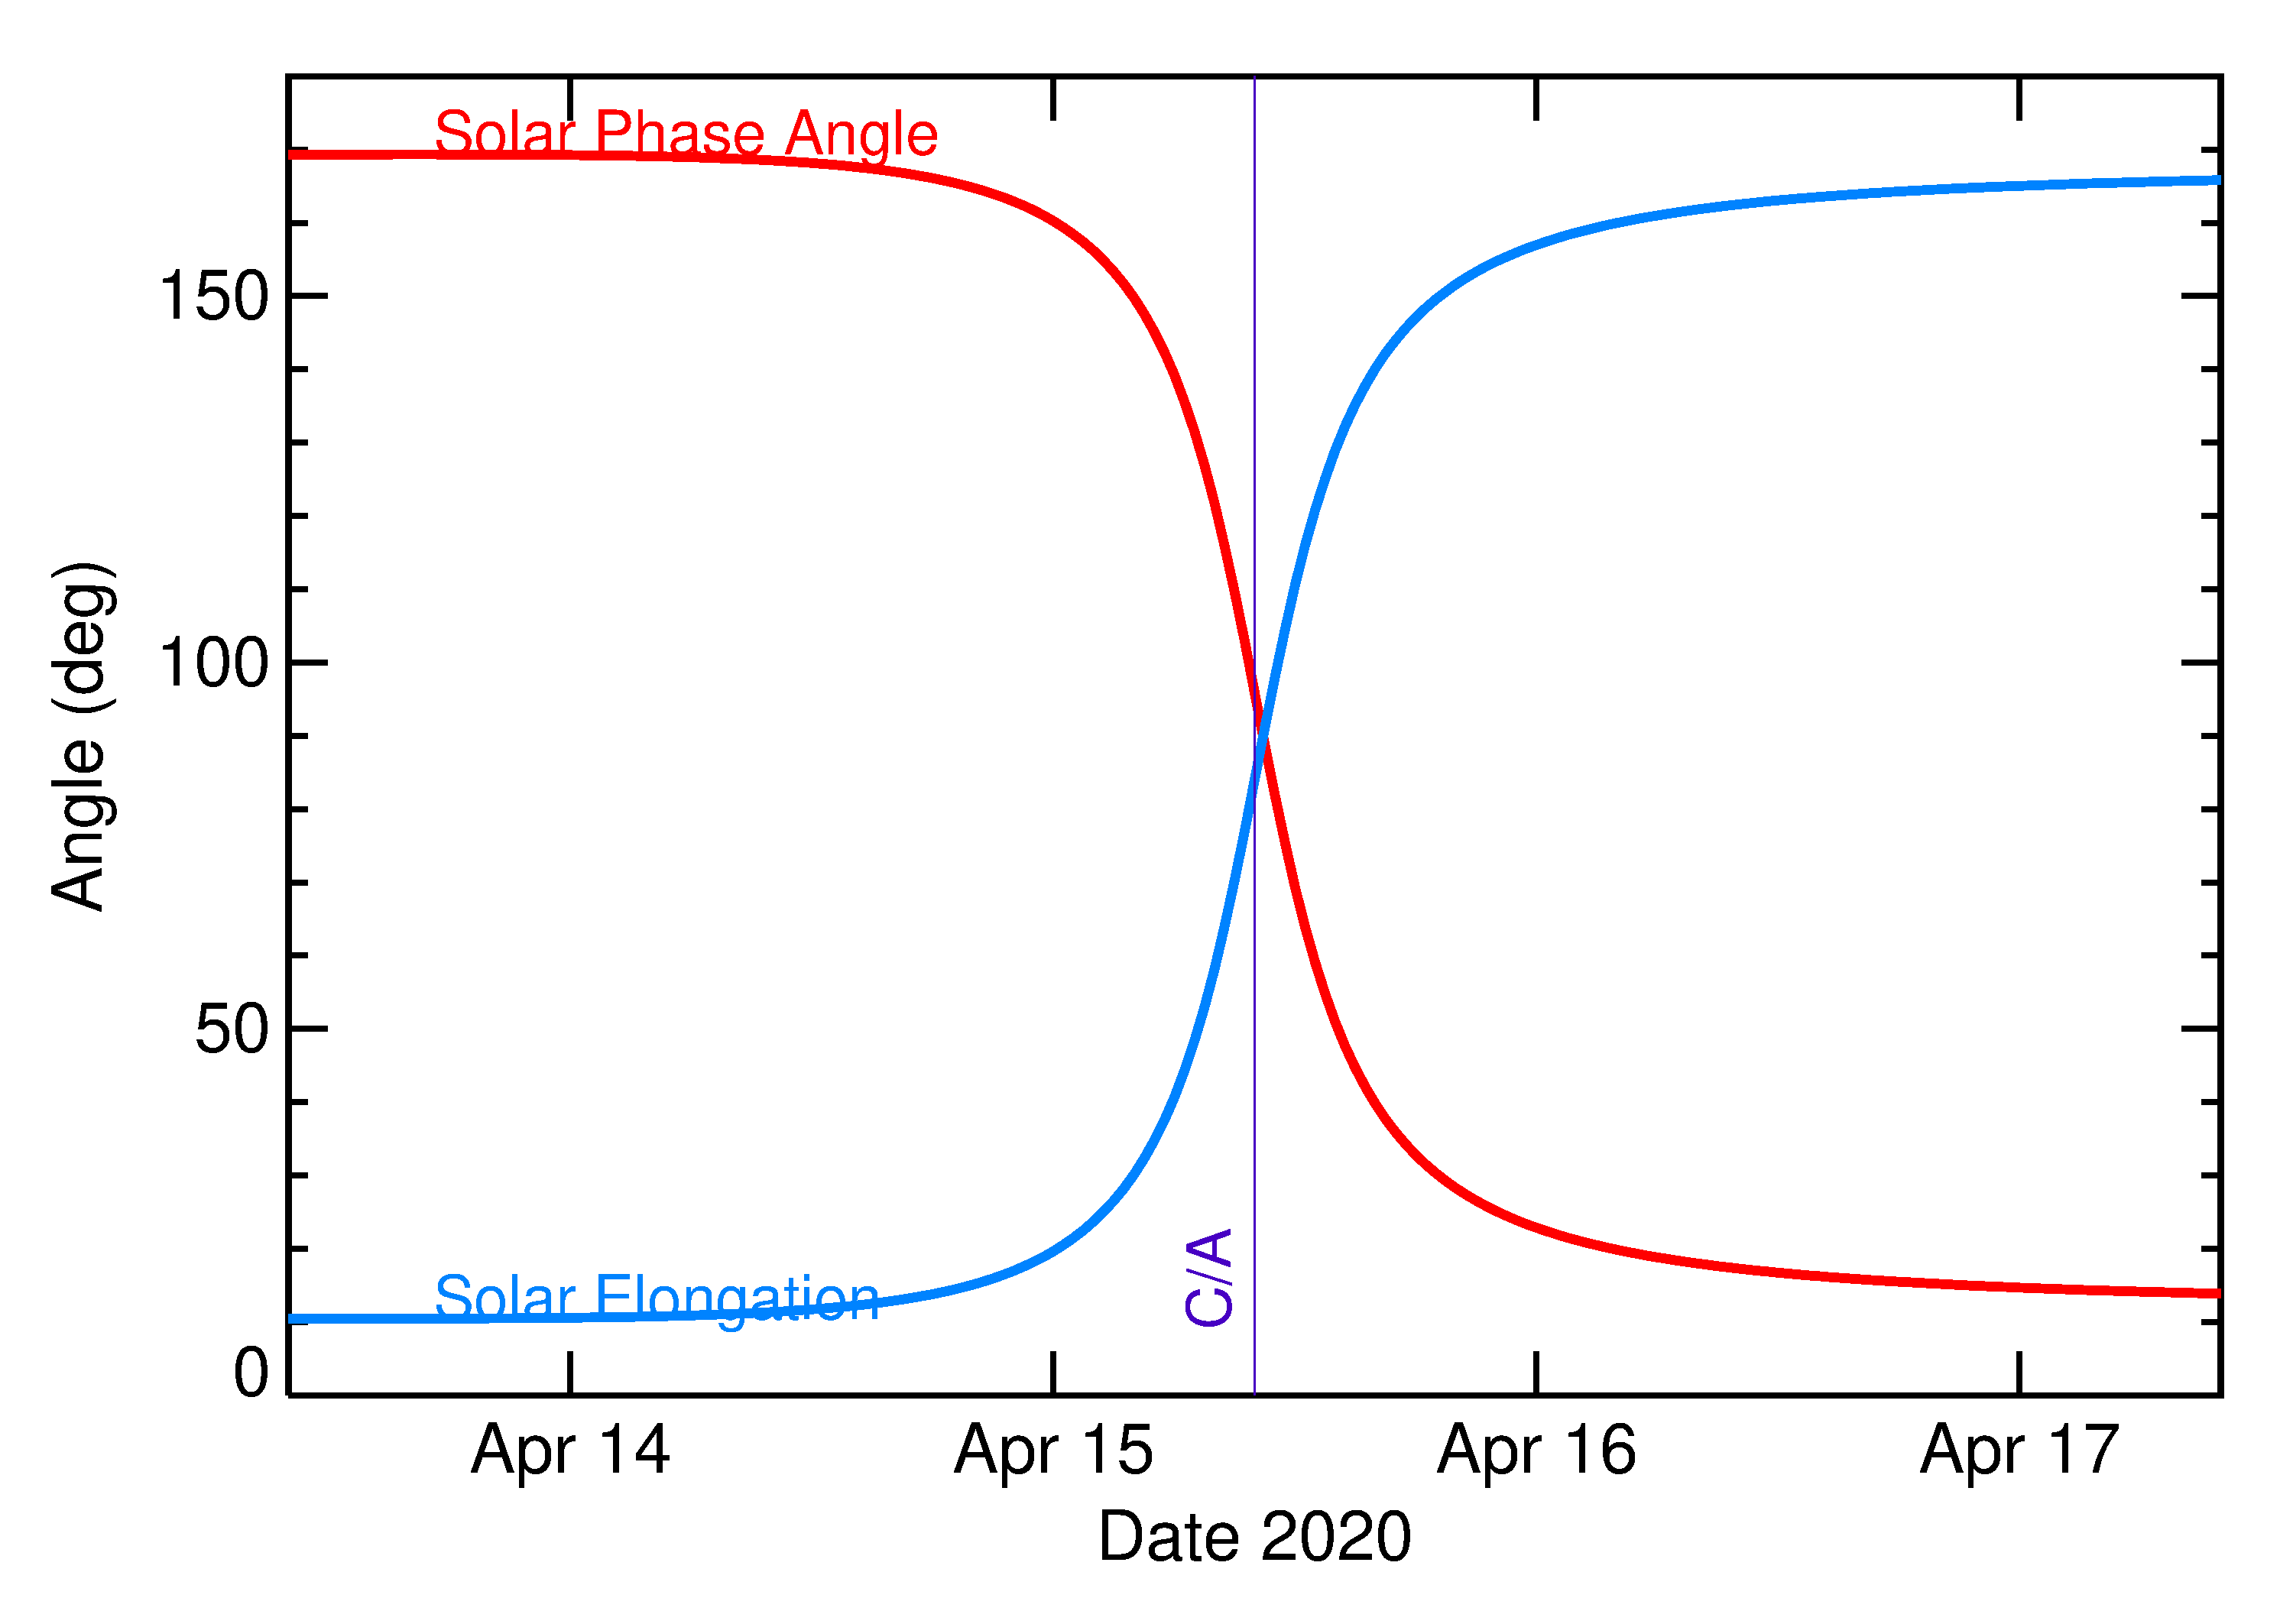 Solar Elongation and Solar Phase Angle of 2020 HO in the days around closest approach